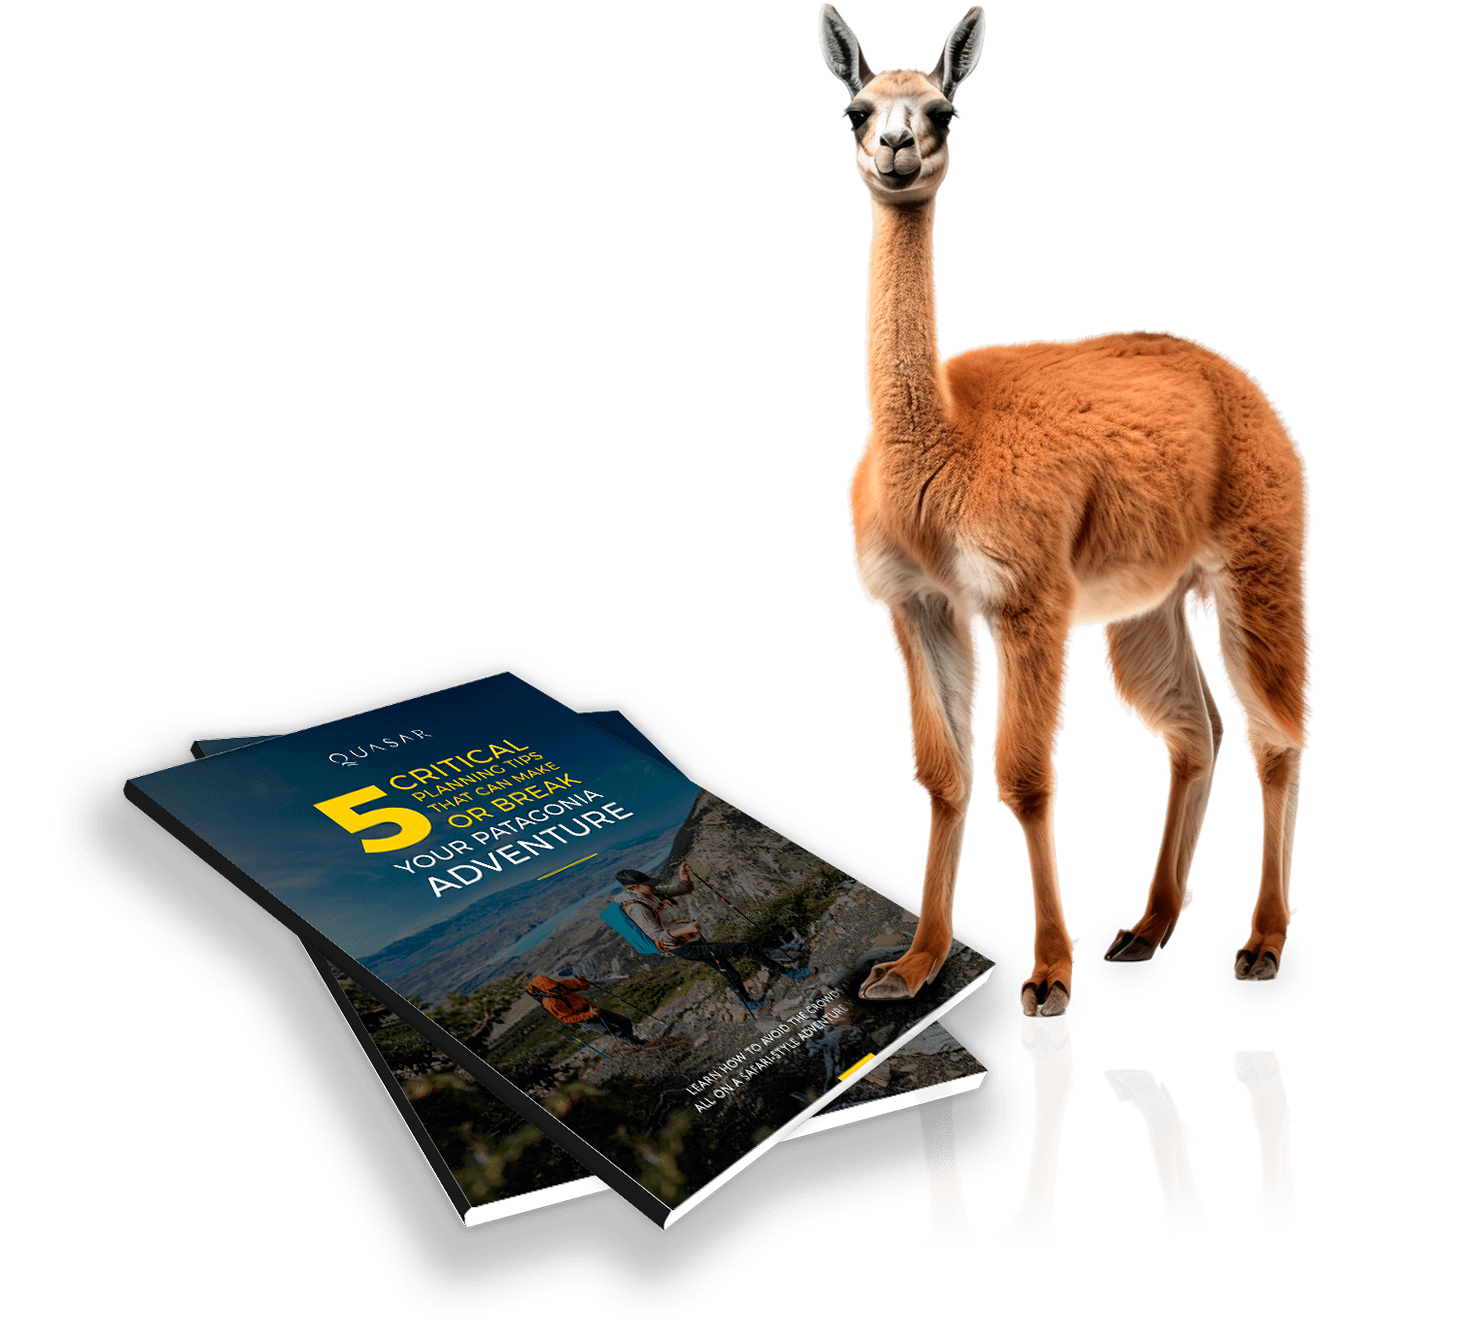 Cover of '5 Critical Planning Tips That Can Make Or Break Your Patagonia Adventure' PDF guide featuring a guanaco in Patagonia